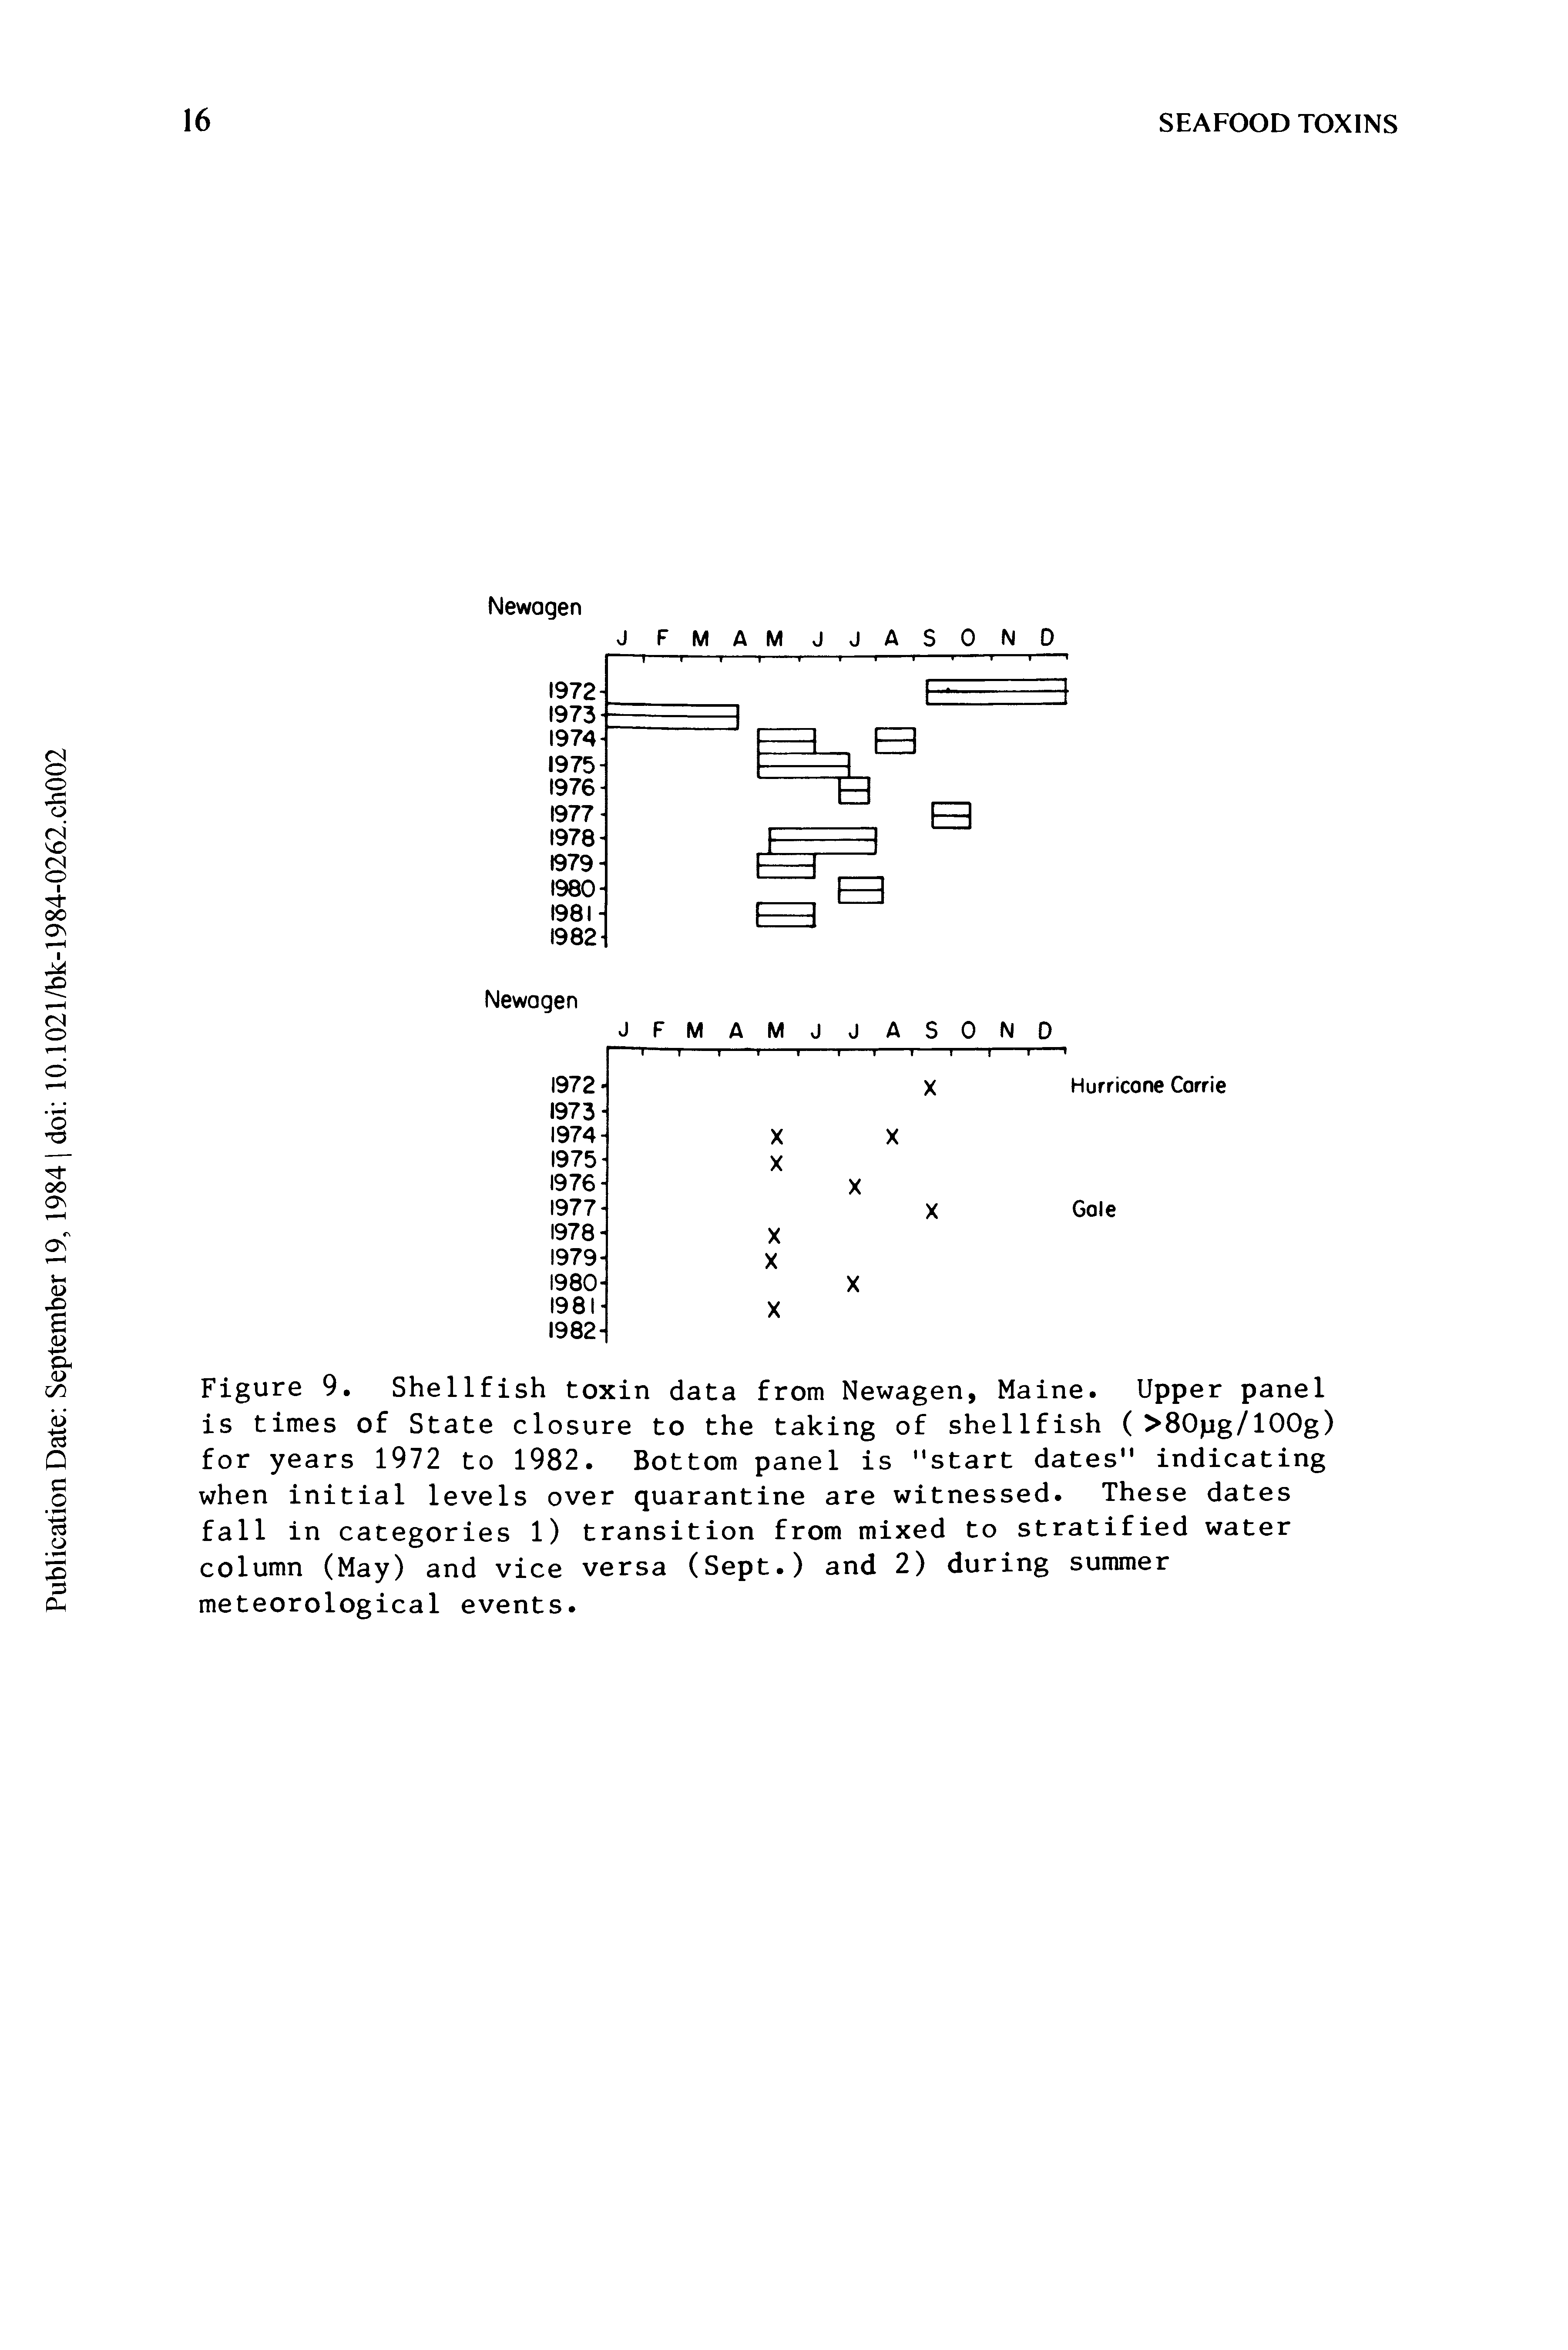 Figure 9. Shellfish toxin data from Newagen, Maine. Upper panel is times of State closure to the taking of shellfish (>80pg/100g) for years 1972 to 1982. Bottom panel is "start dates" indicating when initial levels over quarantine are witnessed. These dates fall in categories 1) transition from mixed to stratified water column (May) and vice versa (Sept.) and 2) during summer meteorological events.